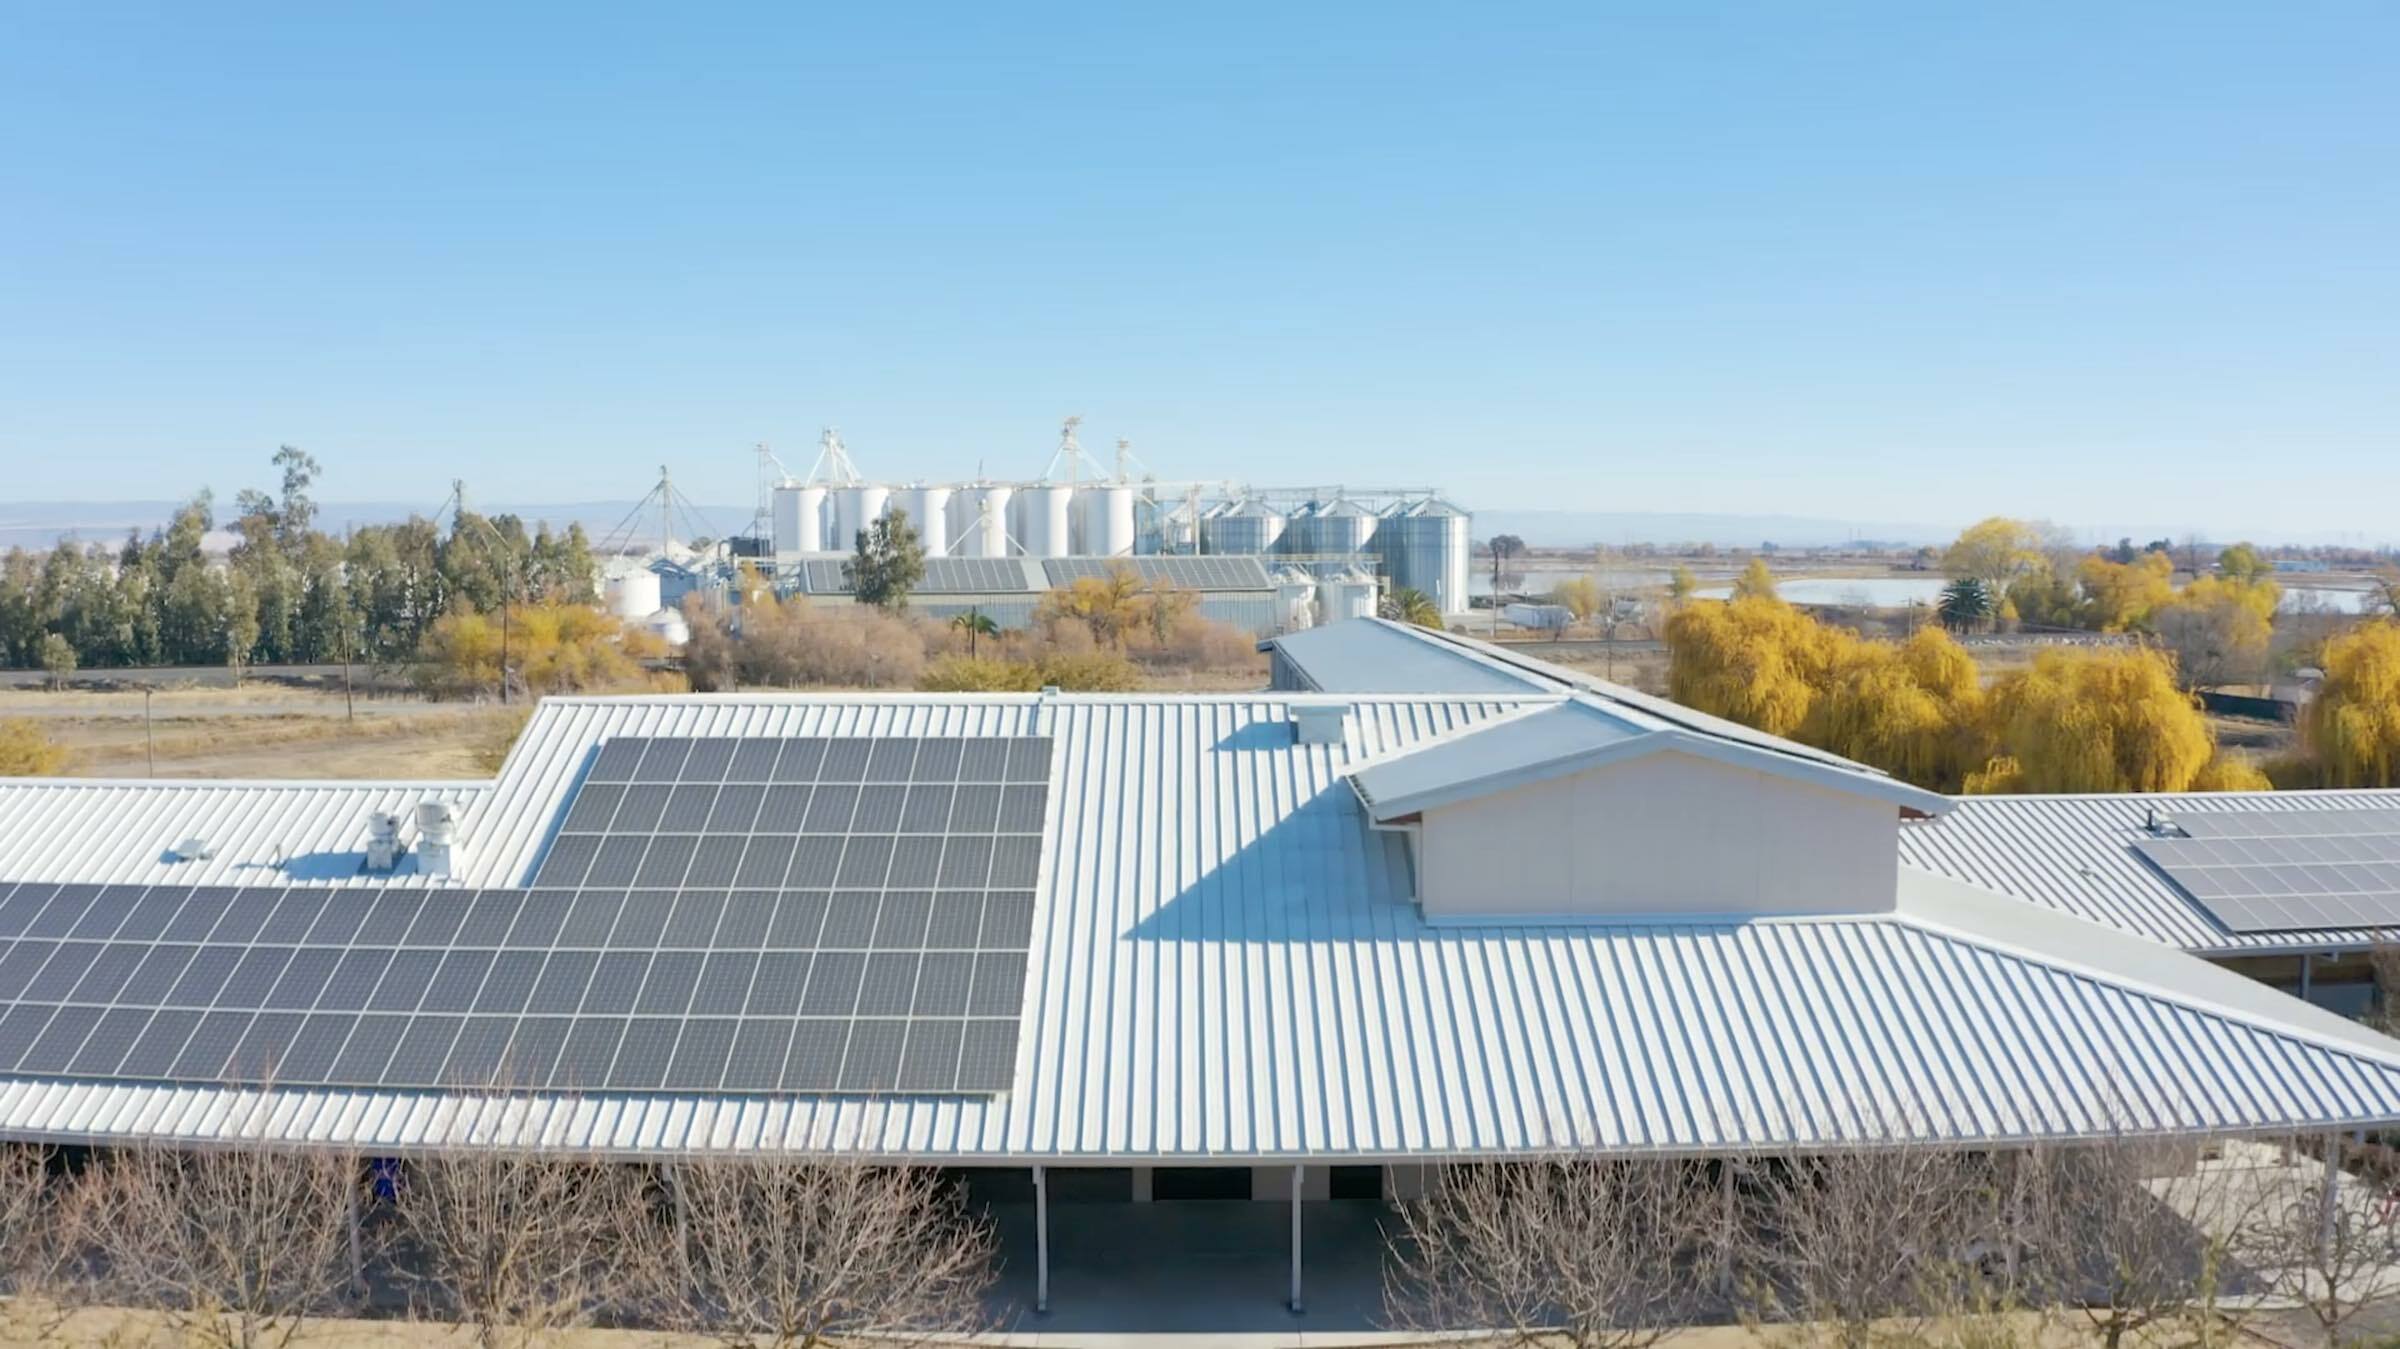 Solar panels atop Lundberg's Administration Building and Drying & Storage Facilities.